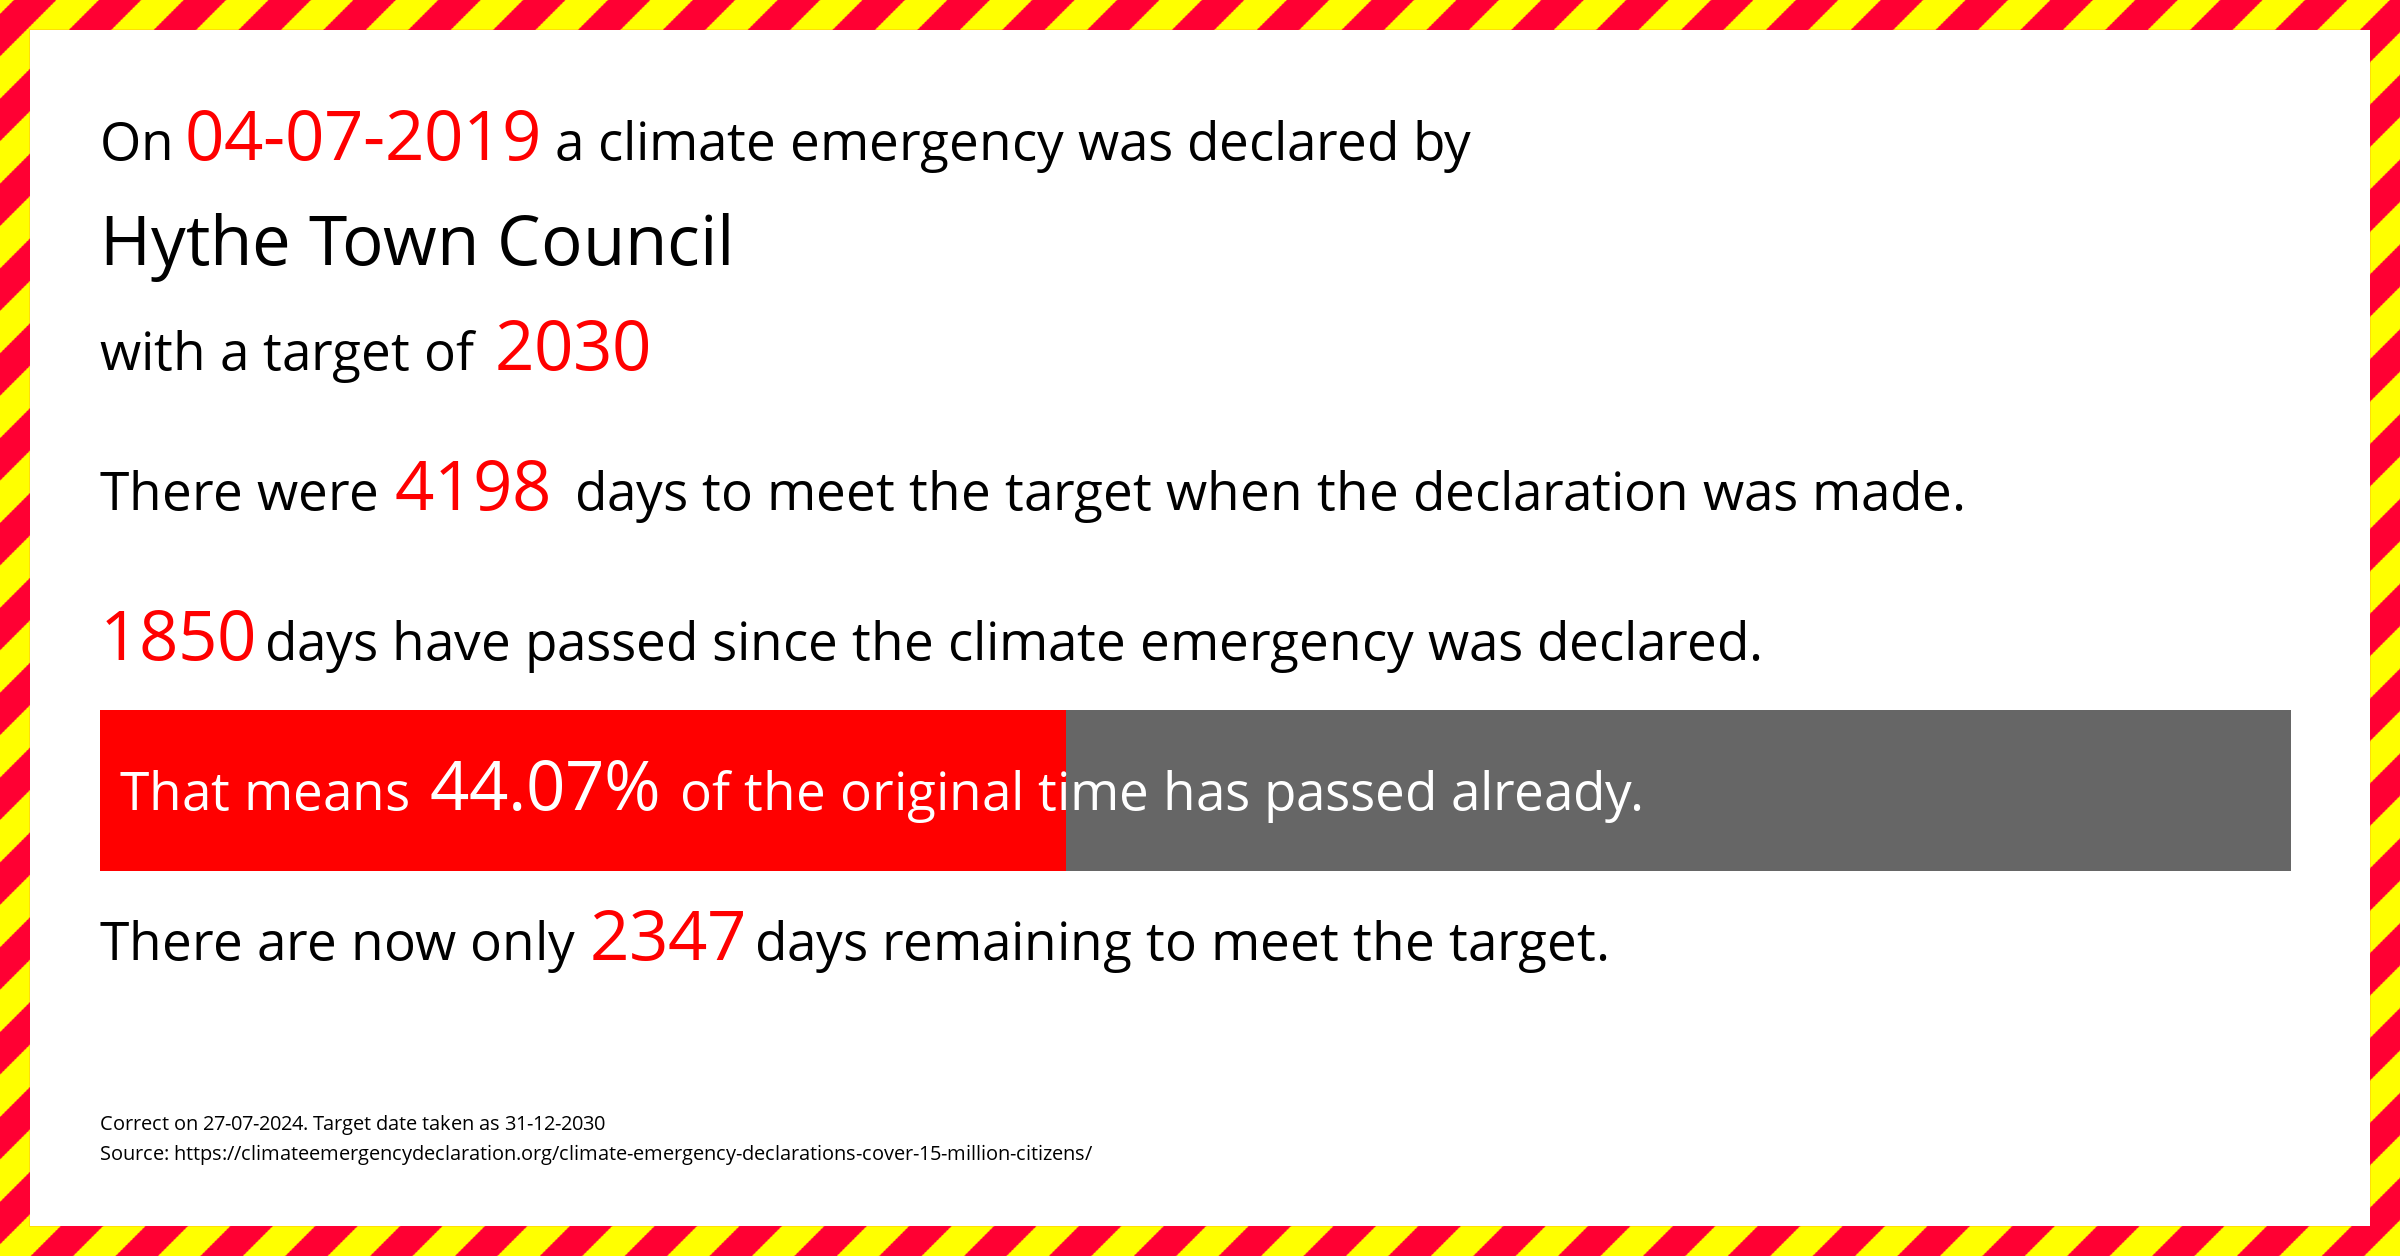 Hythe Town Council declared a Climate emergency on Thursday 4th July 2019, with a target of 2030.